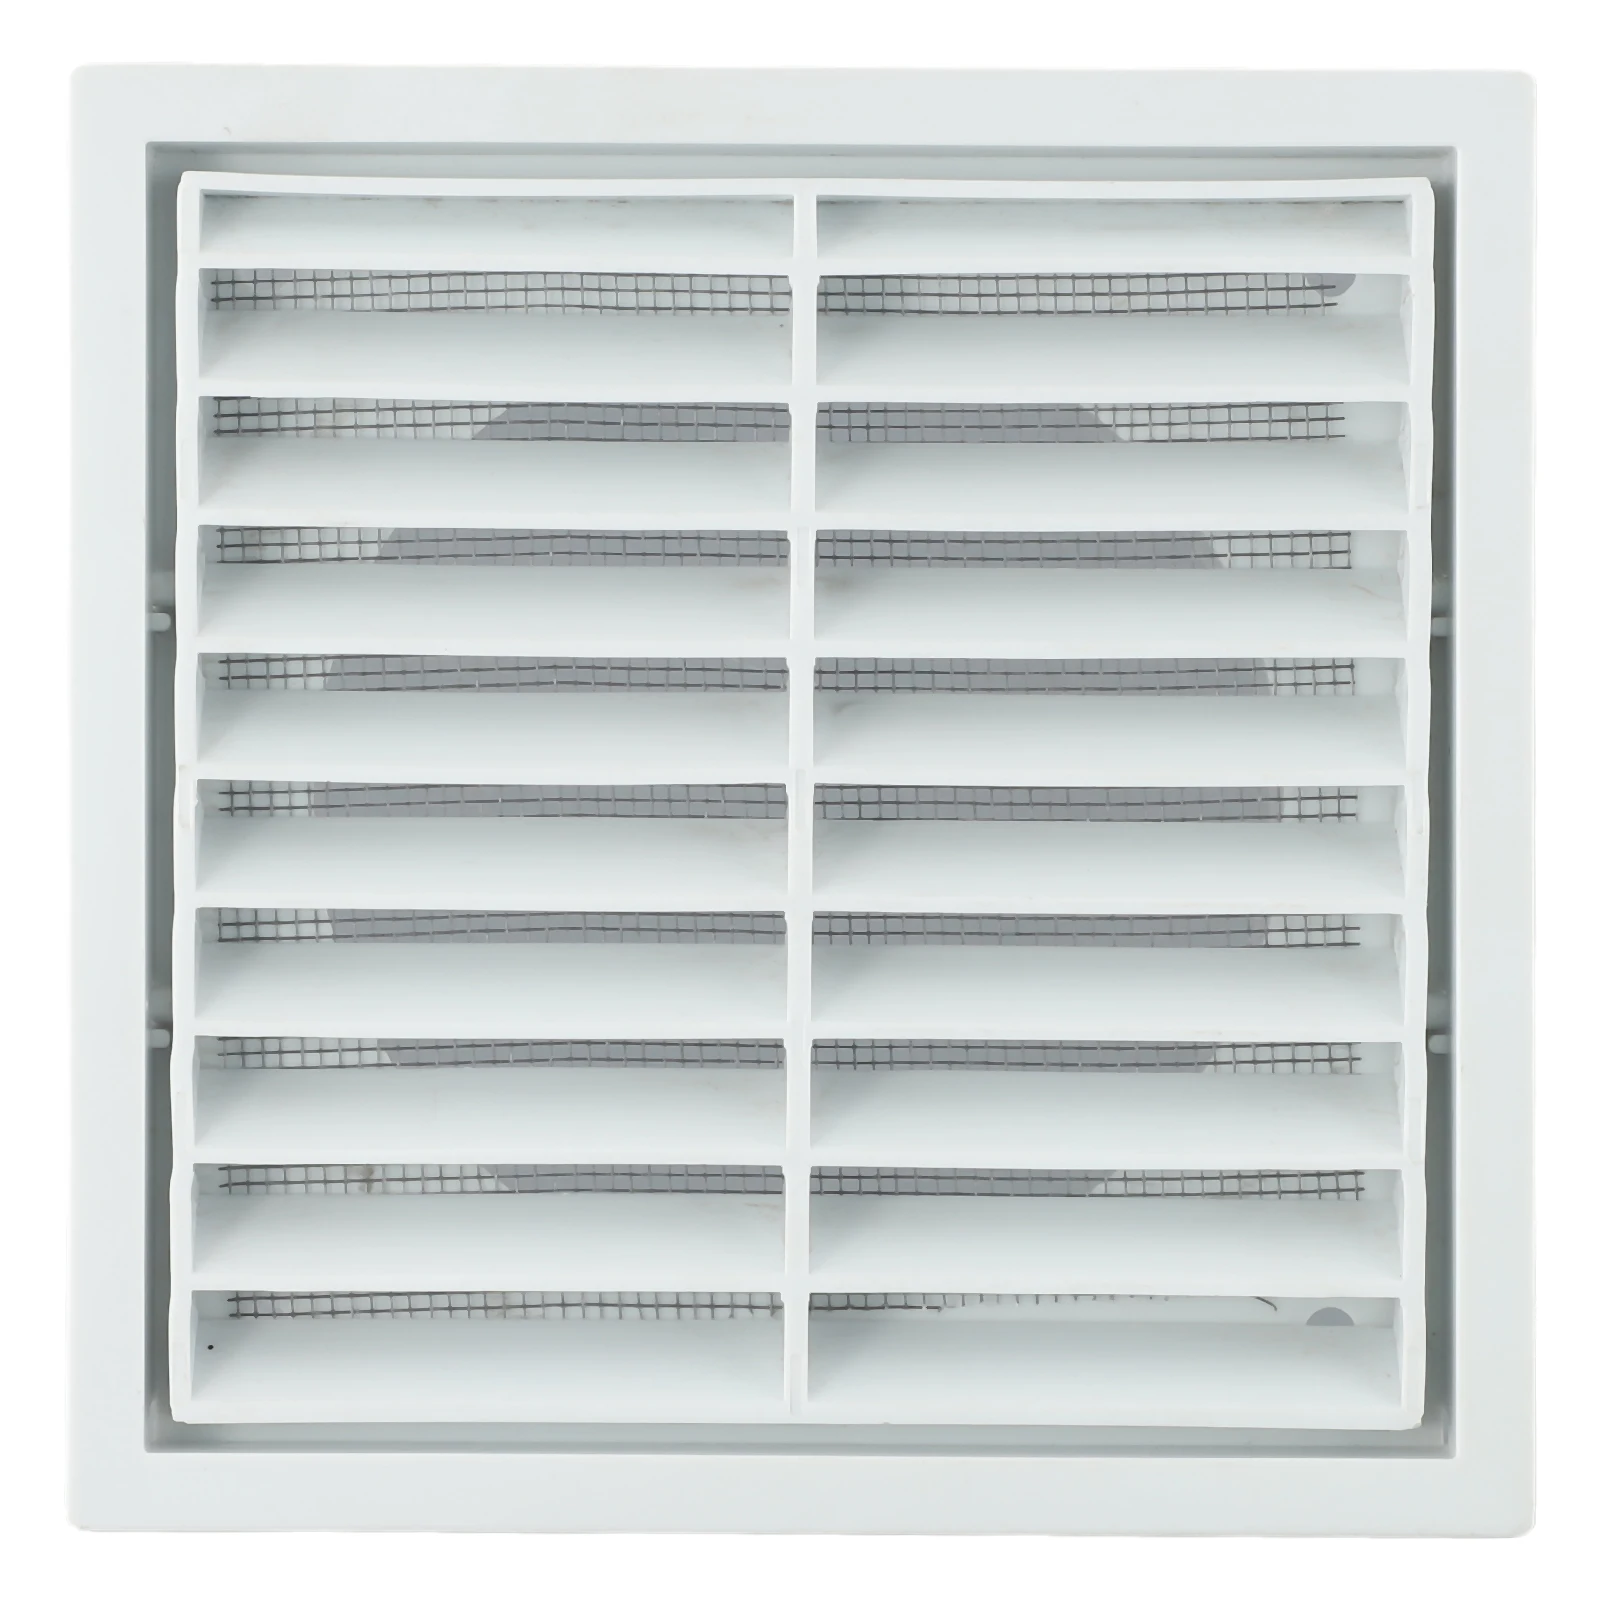 

PP Plastic Grille Ventilation Solution for Exhaust Fans and Clothes Dryers Wide Coverage Indoor and Outdoor Use White